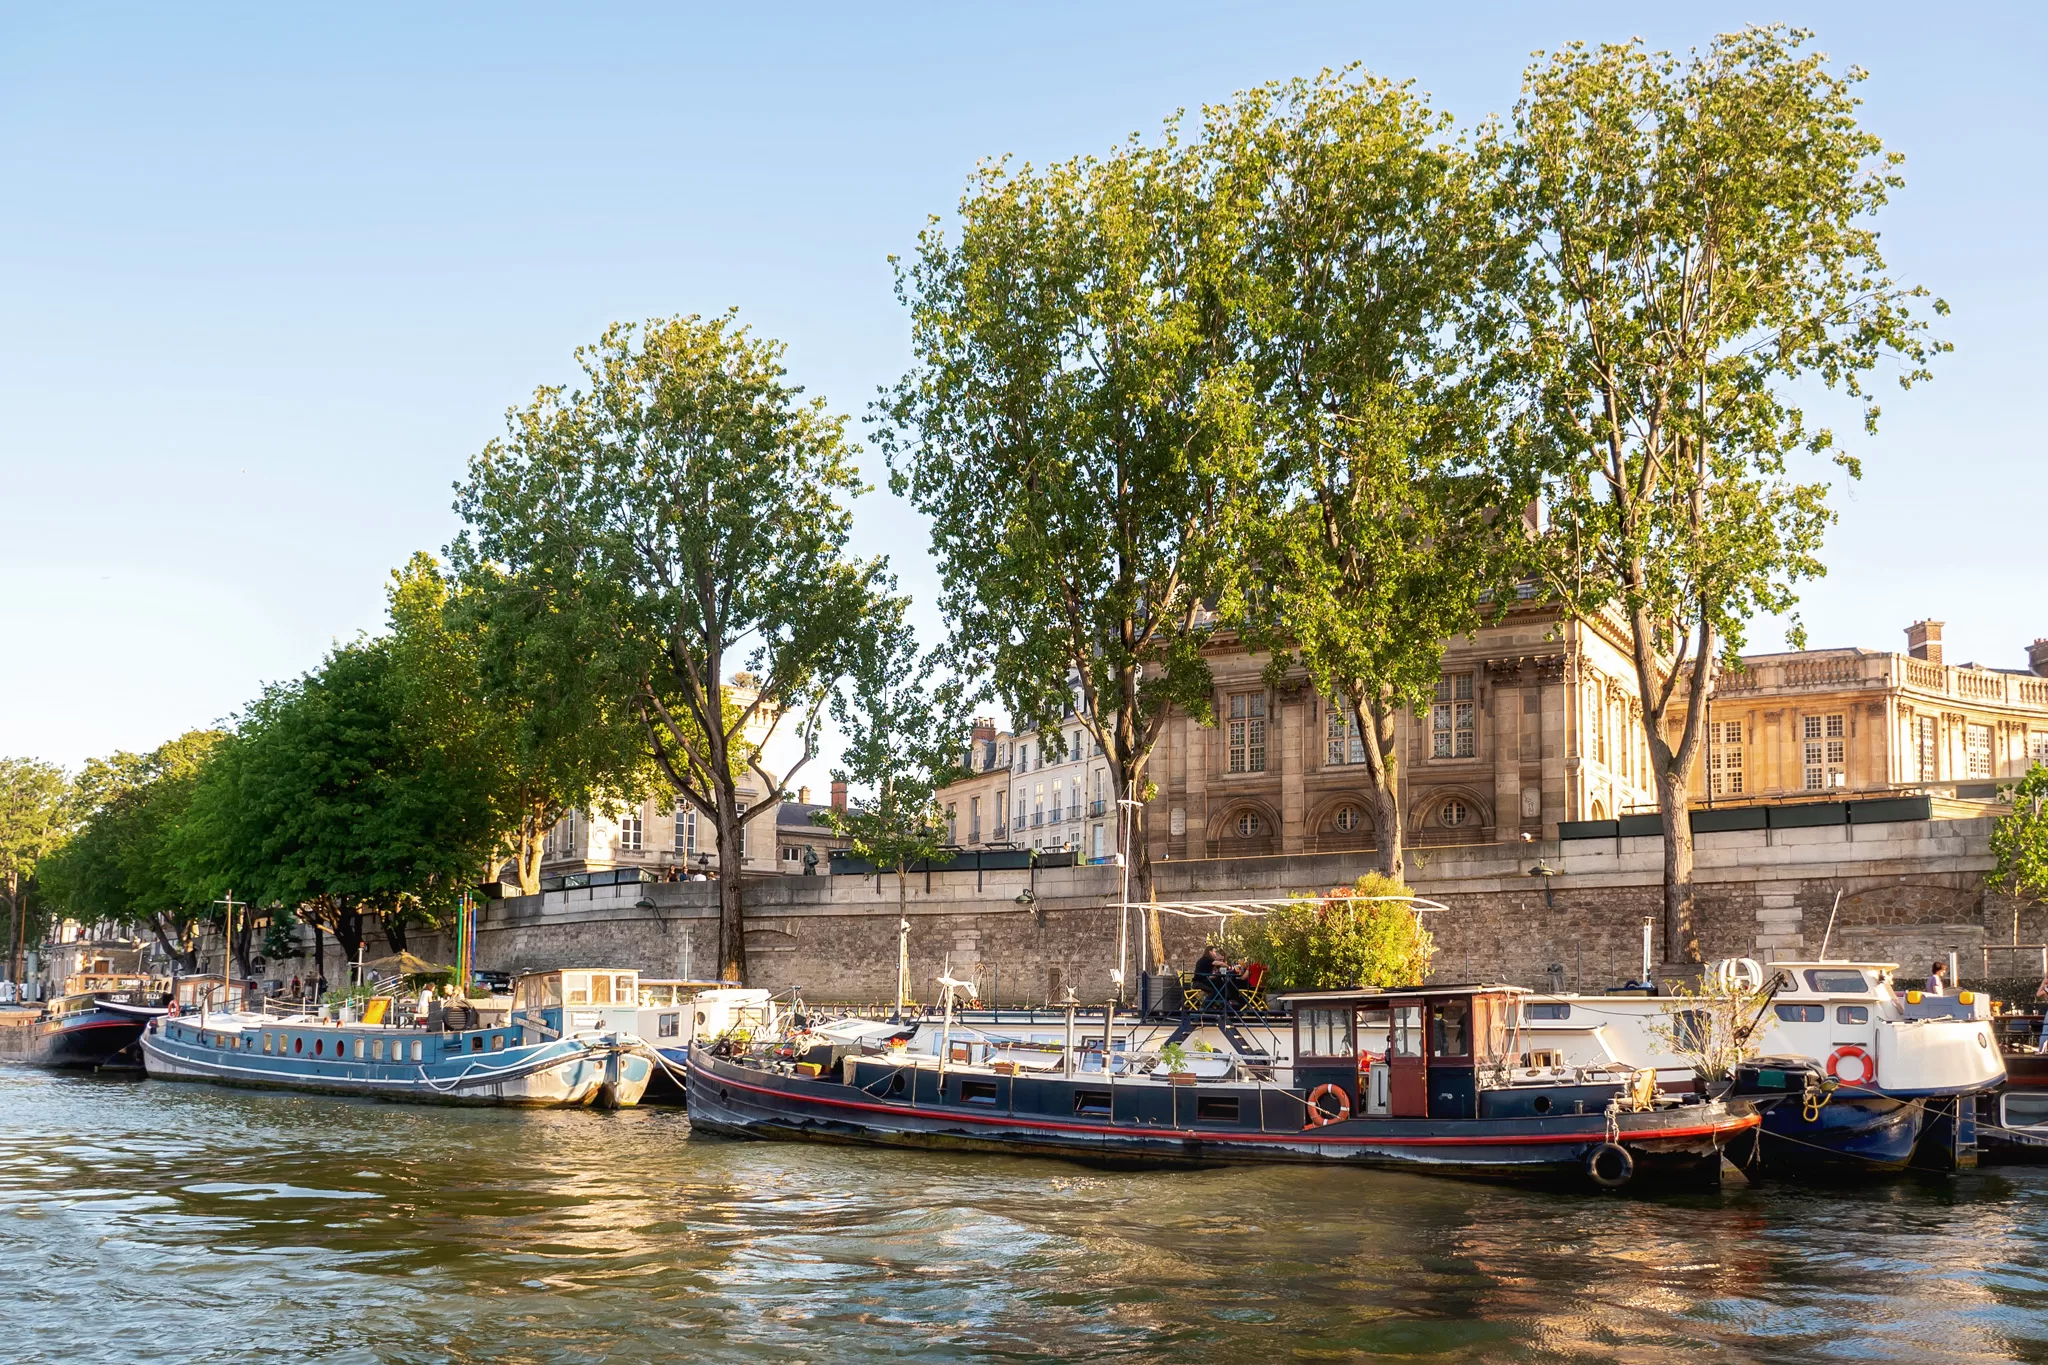 Boats along the river in Paris